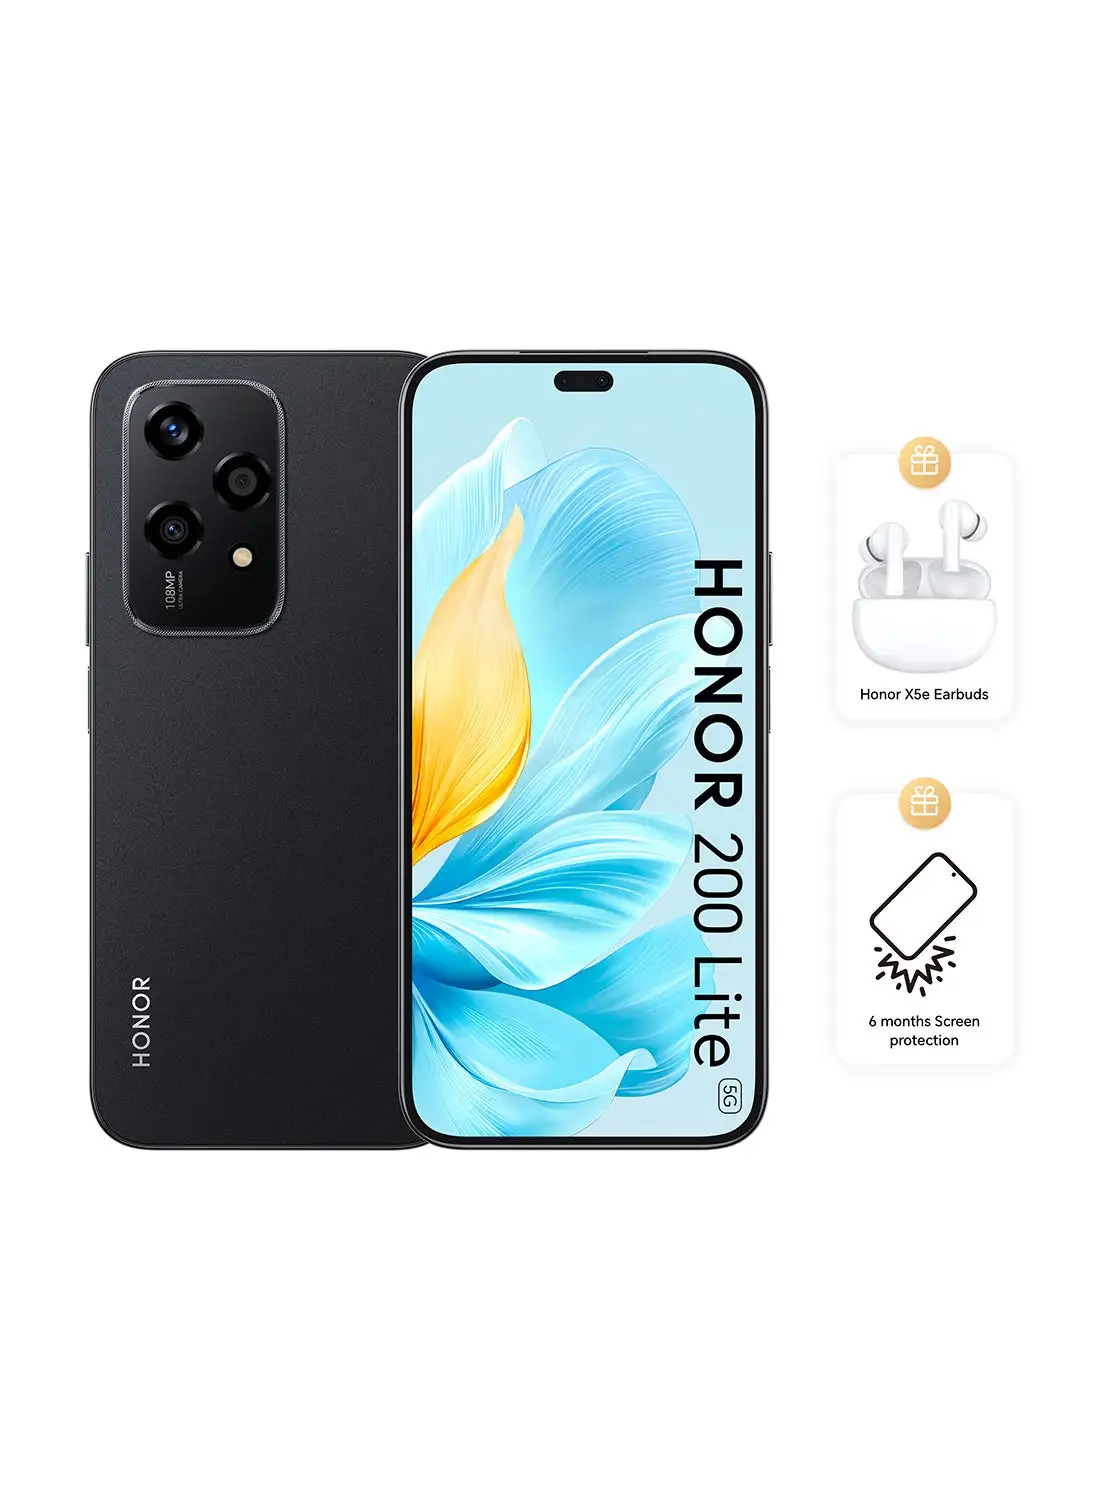 Honor 200 Lite 5G Dual SIM Midnight Black 8GB RAM + 256GB With FREE Honor X5e Earbuds And 6 Month Screen Protection - Middle East Version